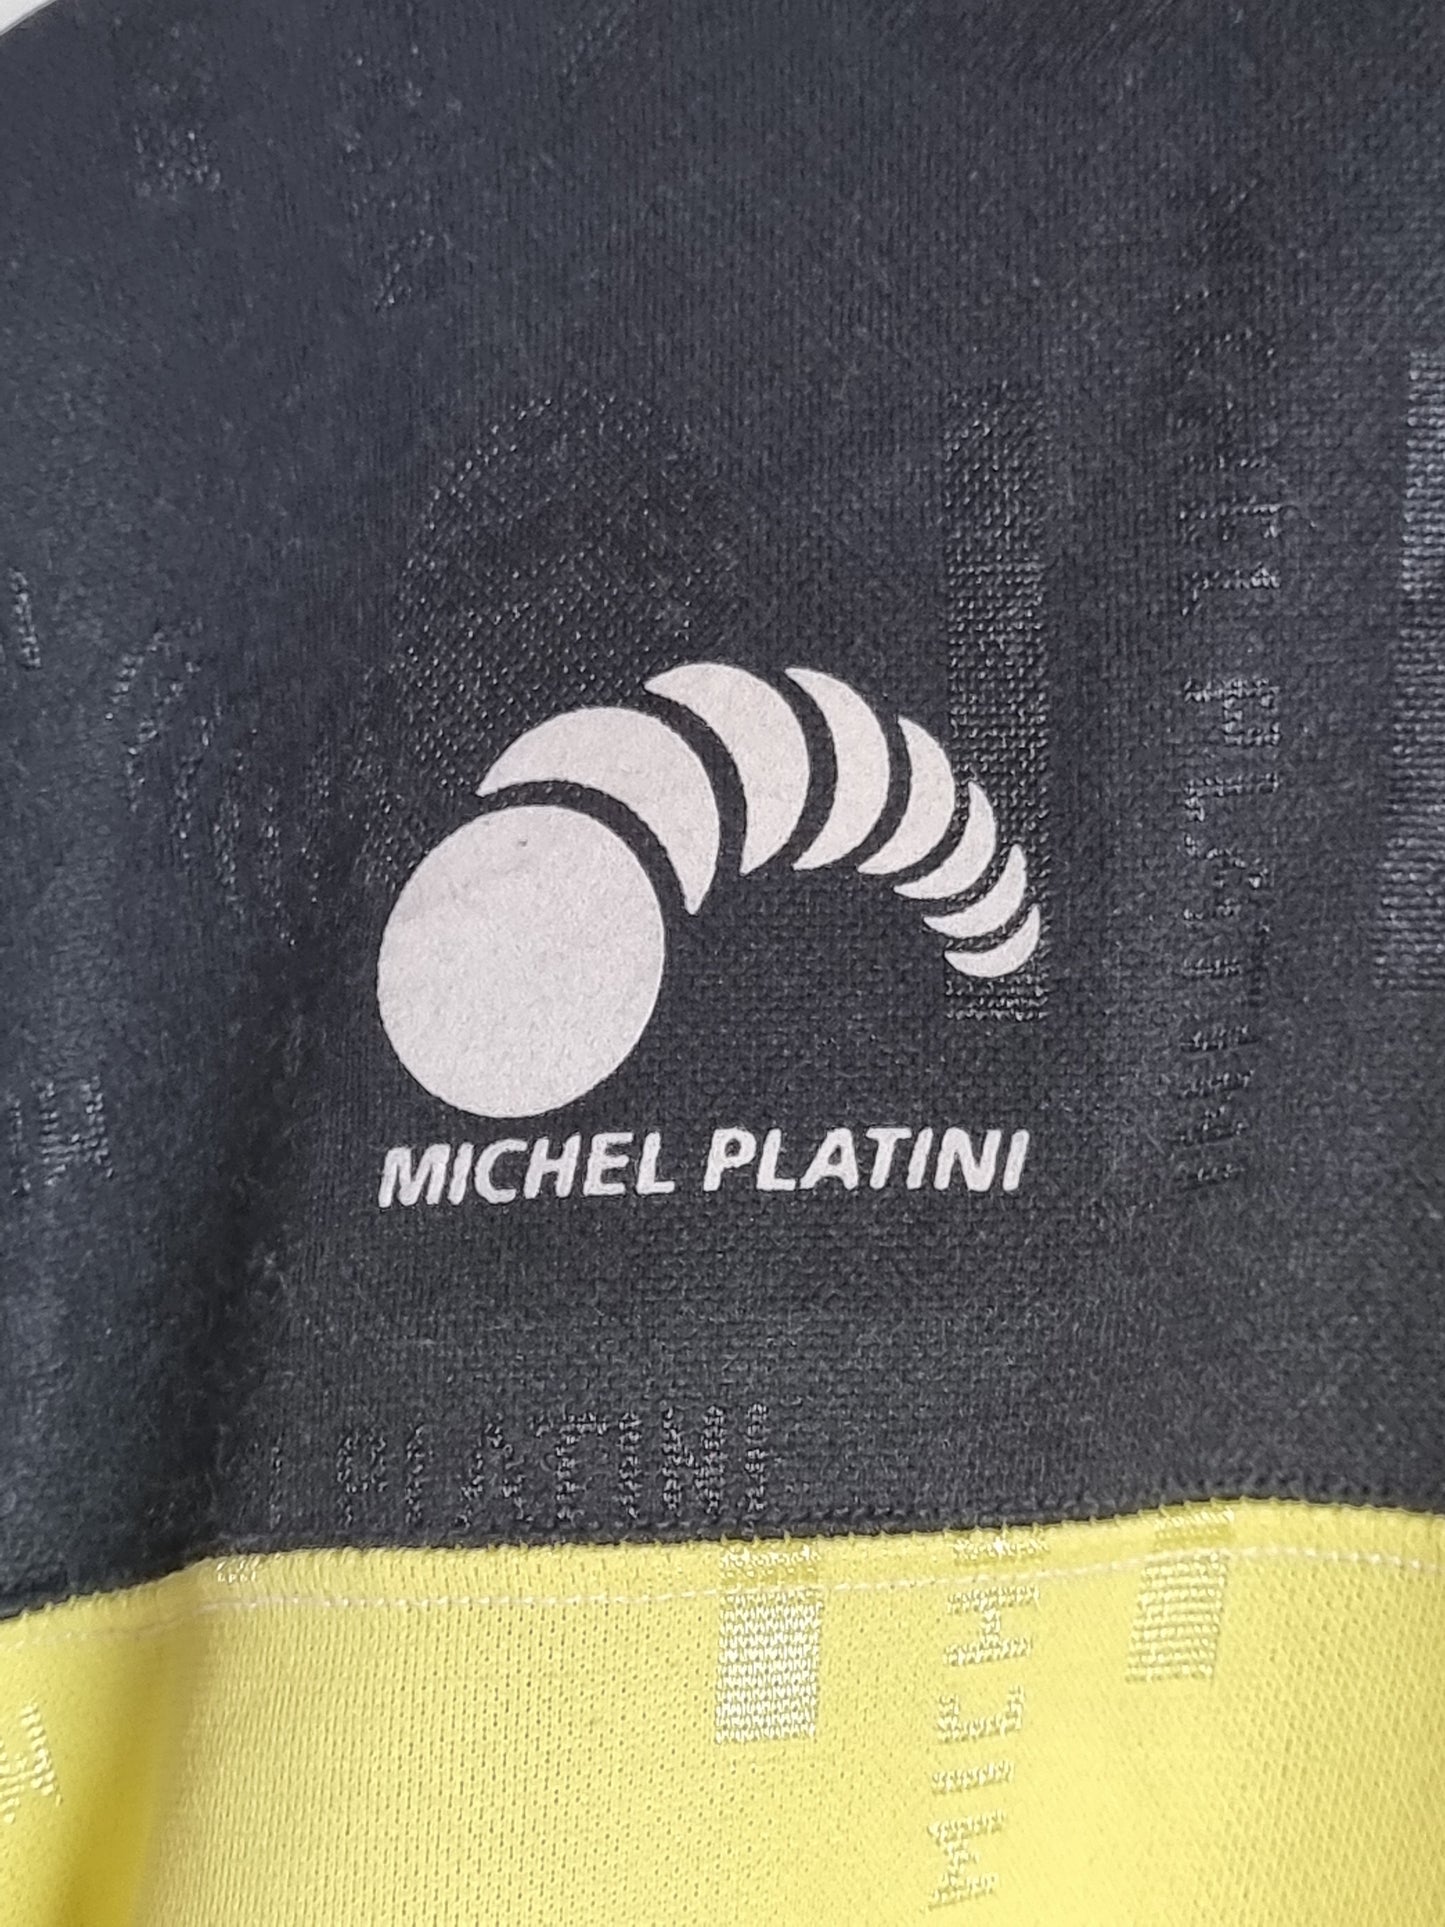 Michel Platini Varietes Club De France Late 80s / Early 90s Match Issue Home Shirt Large